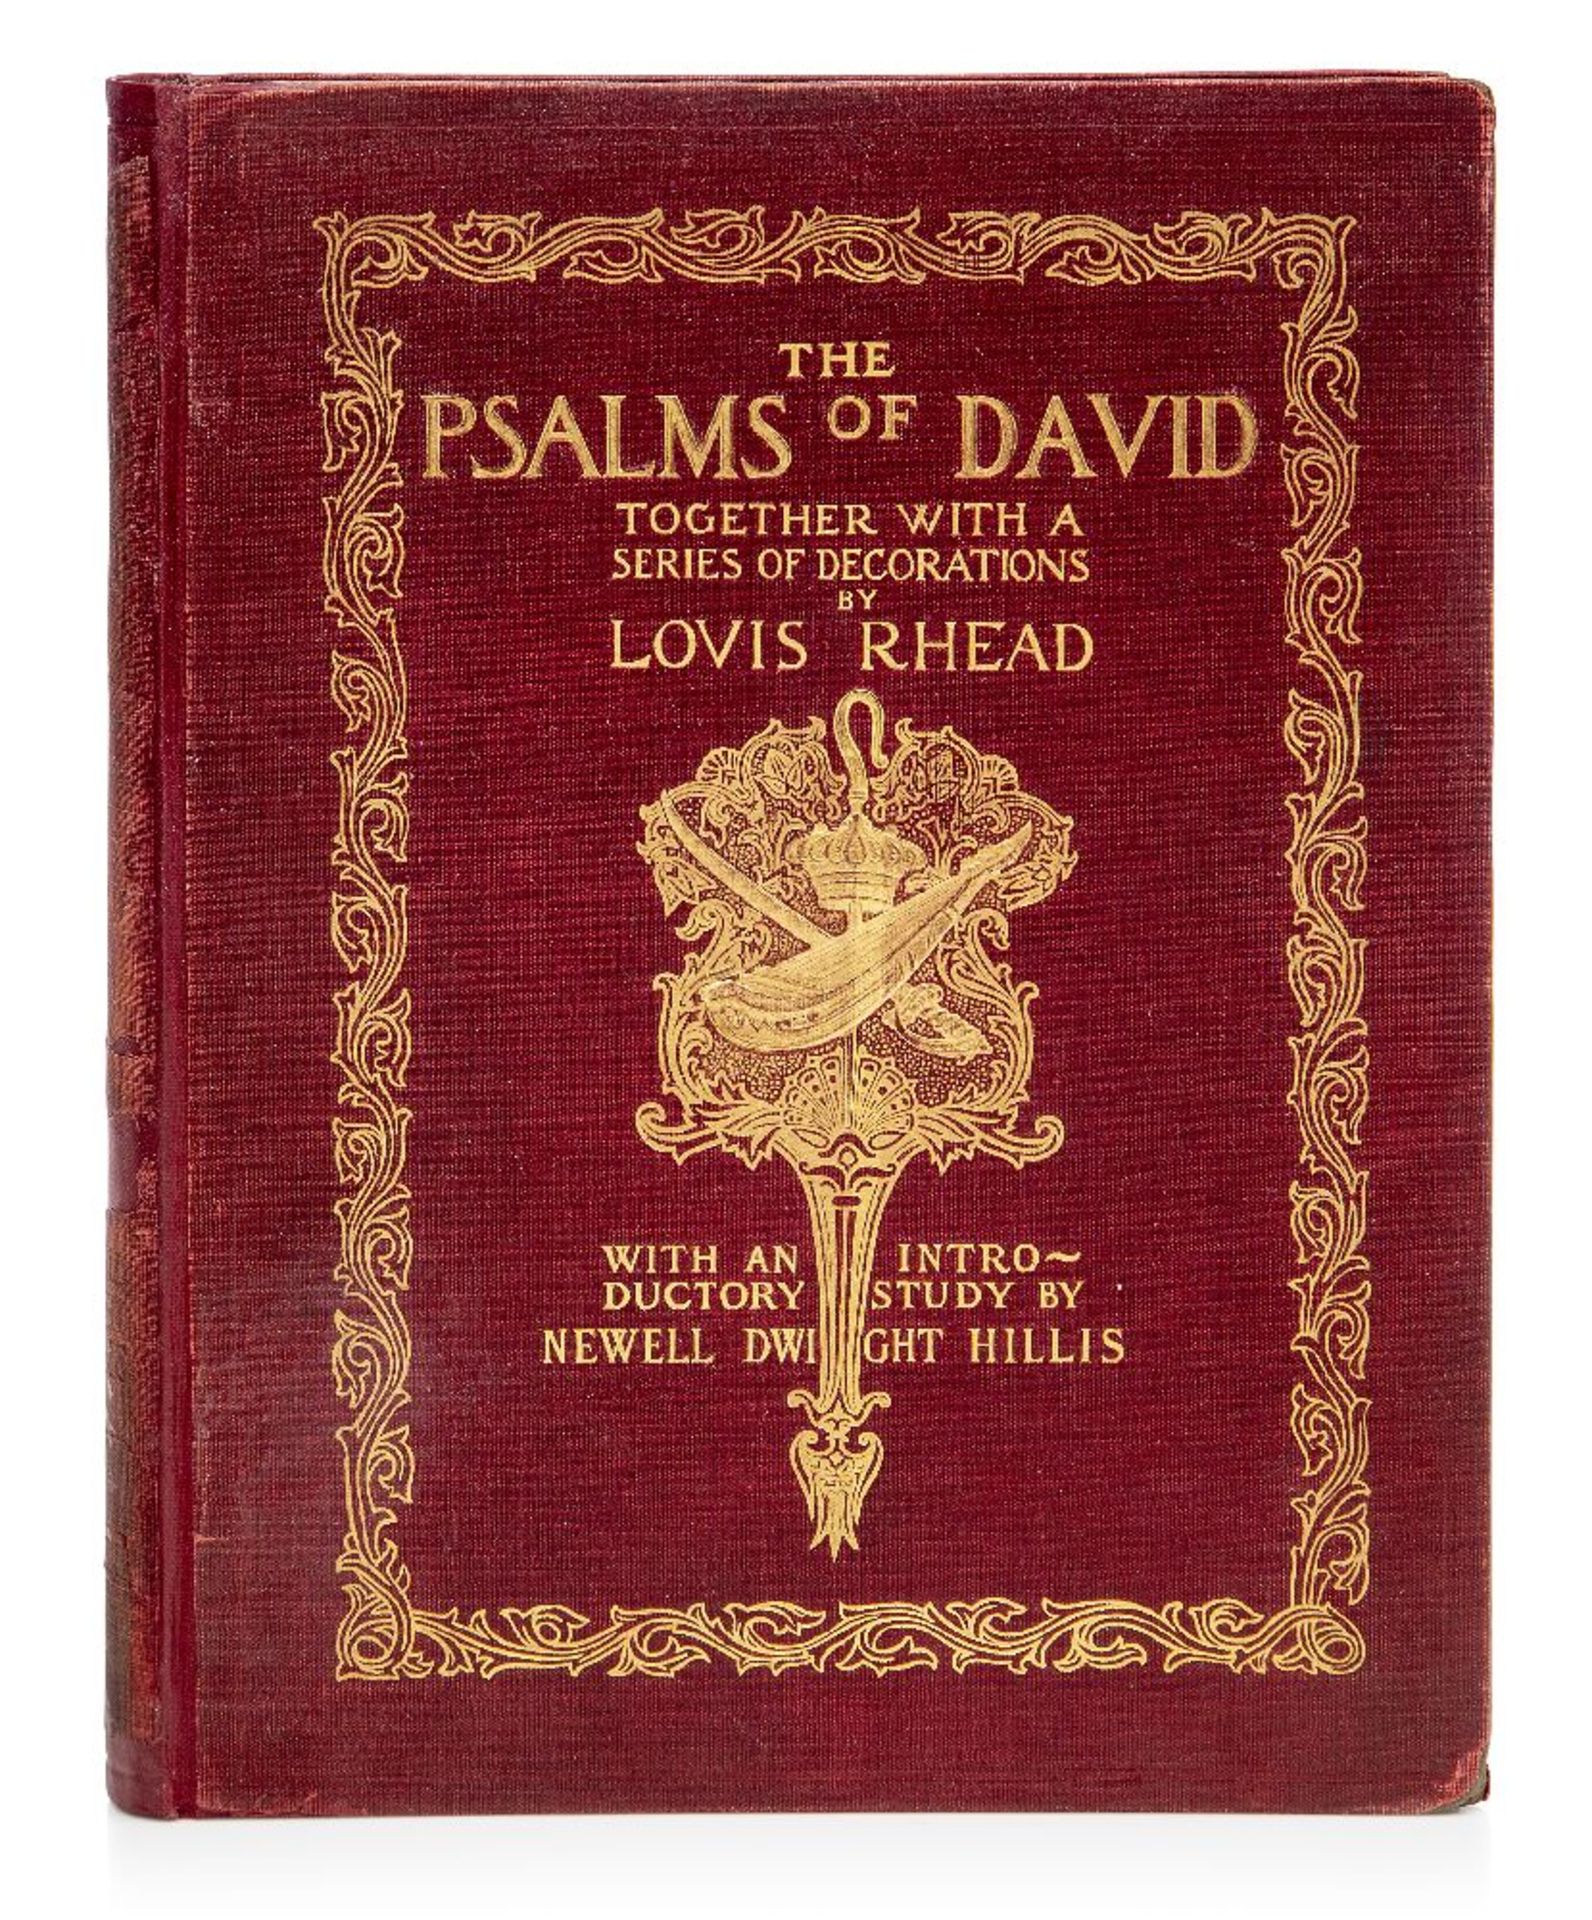 Louis Rhead (British/American 1857-1926), an illustrated book - "The Psalms of David including